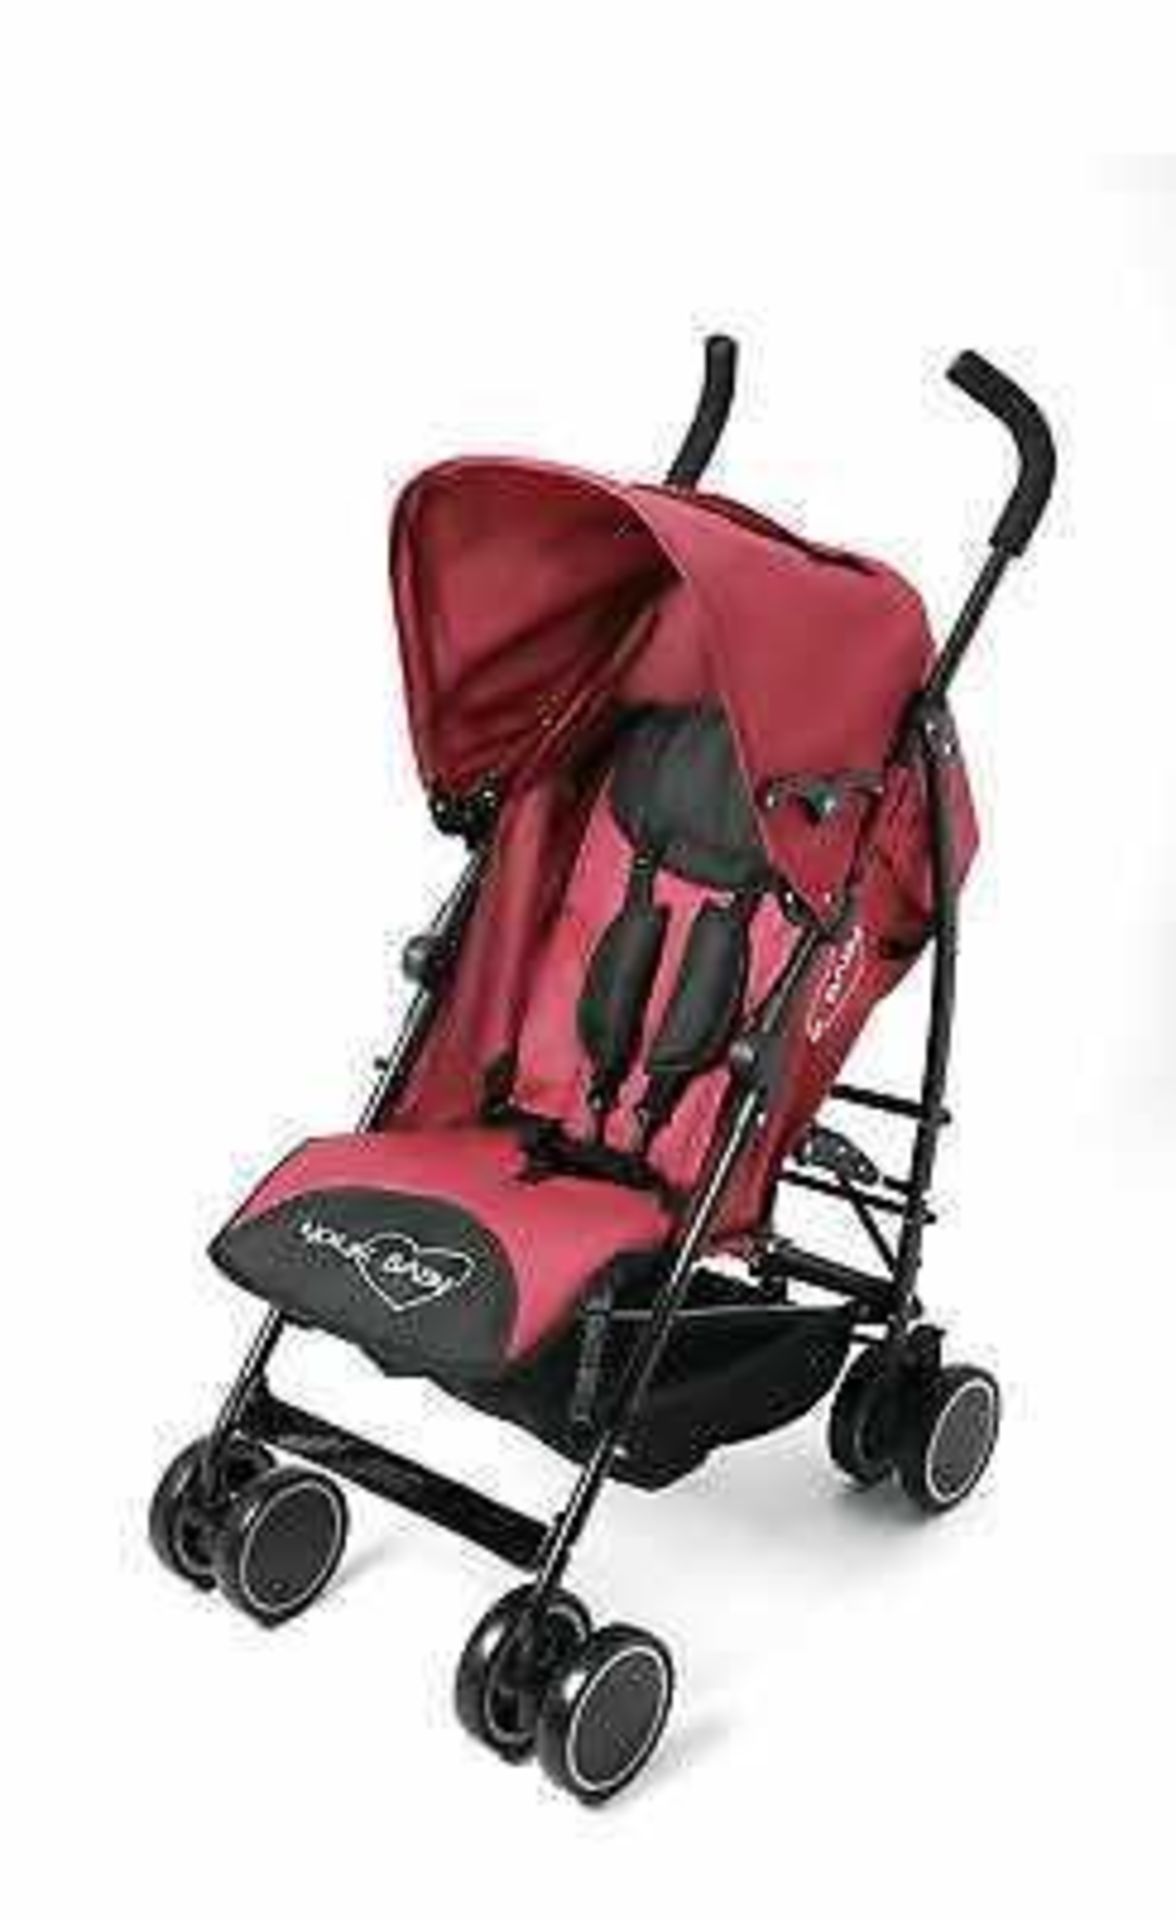 Rrp £100 Boxed Your Baby California Red Infant Stroller